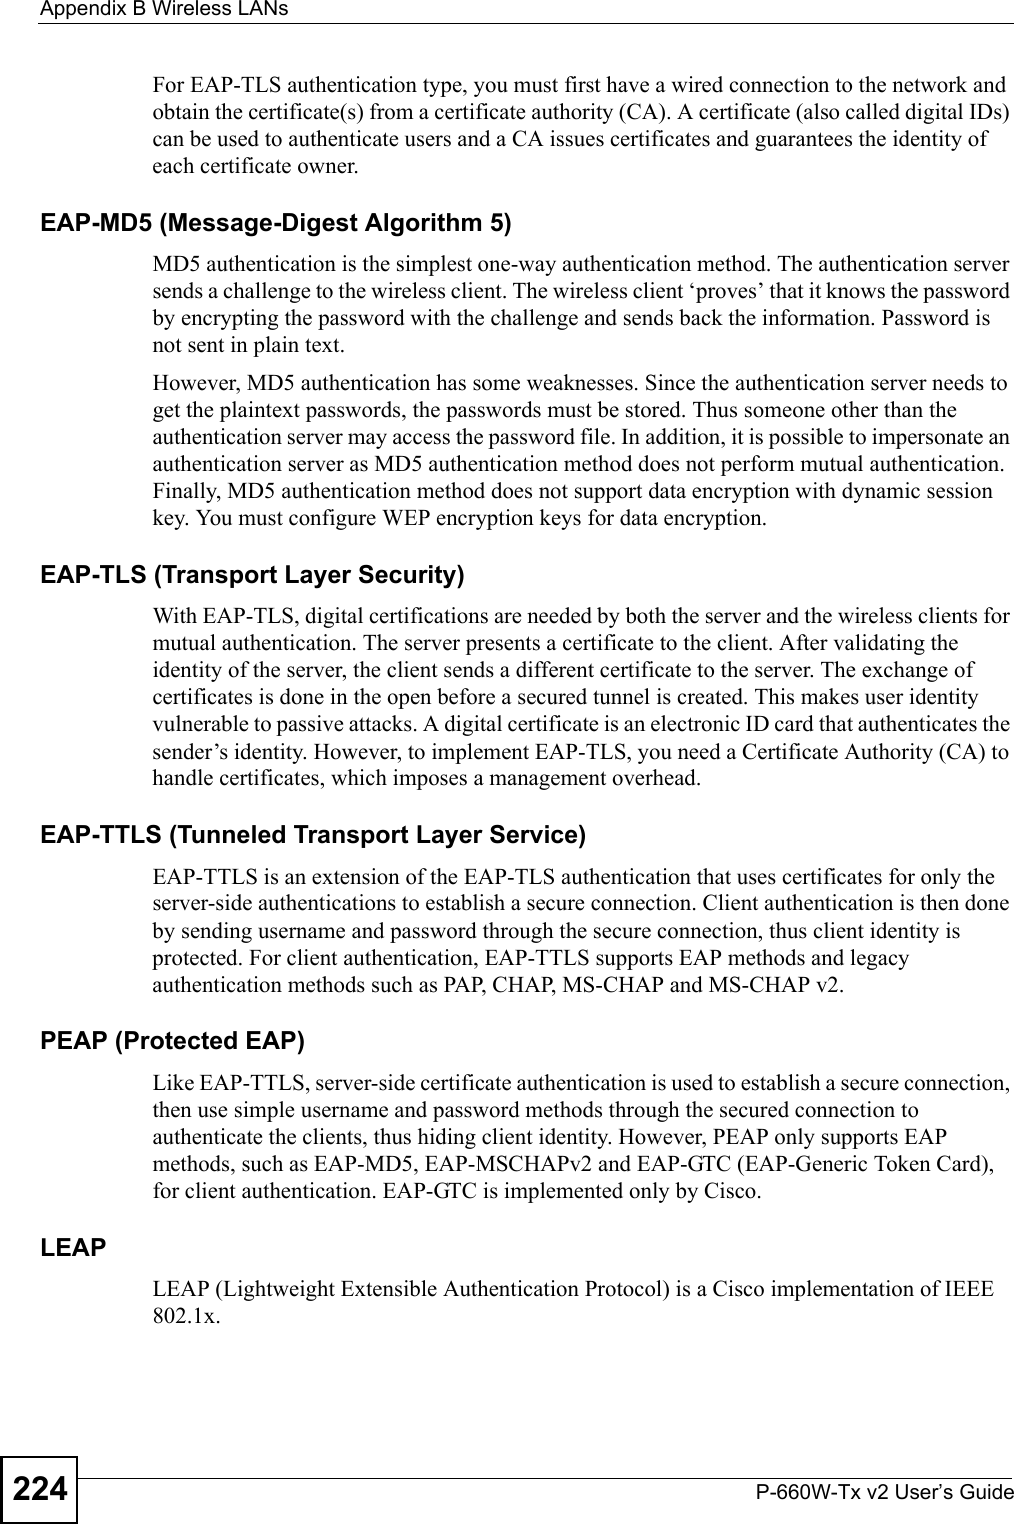 Appendix B Wireless LANsP-660W-Tx v2 User’s Guide224For EAP-TLS authentication type, you must first have a wired connection to the network and obtain the certificate(s) from a certificate authority (CA). A certificate (also called digital IDs) can be used to authenticate users and a CA issues certificates and guarantees the identity of each certificate owner.EAP-MD5 (Message-Digest Algorithm 5)MD5 authentication is the simplest one-way authentication method. The authentication server sends a challenge to the wireless client. The wireless client ‘proves’ that it knows the password by encrypting the password with the challenge and sends back the information. Password is not sent in plain text. However, MD5 authentication has some weaknesses. Since the authentication server needs to get the plaintext passwords, the passwords must be stored. Thus someone other than the authentication server may access the password file. In addition, it is possible to impersonate an authentication server as MD5 authentication method does not perform mutual authentication. Finally, MD5 authentication method does not support data encryption with dynamic session key. You must configure WEP encryption keys for data encryption. EAP-TLS (Transport Layer Security)With EAP-TLS, digital certifications are needed by both the server and the wireless clients for mutual authentication. The server presents a certificate to the client. After validating the identity of the server, the client sends a different certificate to the server. The exchange of certificates is done in the open before a secured tunnel is created. This makes user identity vulnerable to passive attacks. A digital certificate is an electronic ID card that authenticates the sender’s identity. However, to implement EAP-TLS, you need a Certificate Authority (CA) to handle certificates, which imposes a management overhead. EAP-TTLS (Tunneled Transport Layer Service) EAP-TTLS is an extension of the EAP-TLS authentication that uses certificates for only the server-side authentications to establish a secure connection. Client authentication is then done by sending username and password through the secure connection, thus client identity is protected. For client authentication, EAP-TTLS supports EAP methods and legacy authentication methods such as PAP, CHAP, MS-CHAP and MS-CHAP v2. PEAP (Protected EAP)   Like EAP-TTLS, server-side certificate authentication is used to establish a secure connection, then use simple username and password methods through the secured connection to authenticate the clients, thus hiding client identity. However, PEAP only supports EAP methods, such as EAP-MD5, EAP-MSCHAPv2 and EAP-GTC (EAP-Generic Token Card), for client authentication. EAP-GTC is implemented only by Cisco.LEAPLEAP (Lightweight Extensible Authentication Protocol) is a Cisco implementation of IEEE 802.1x. 